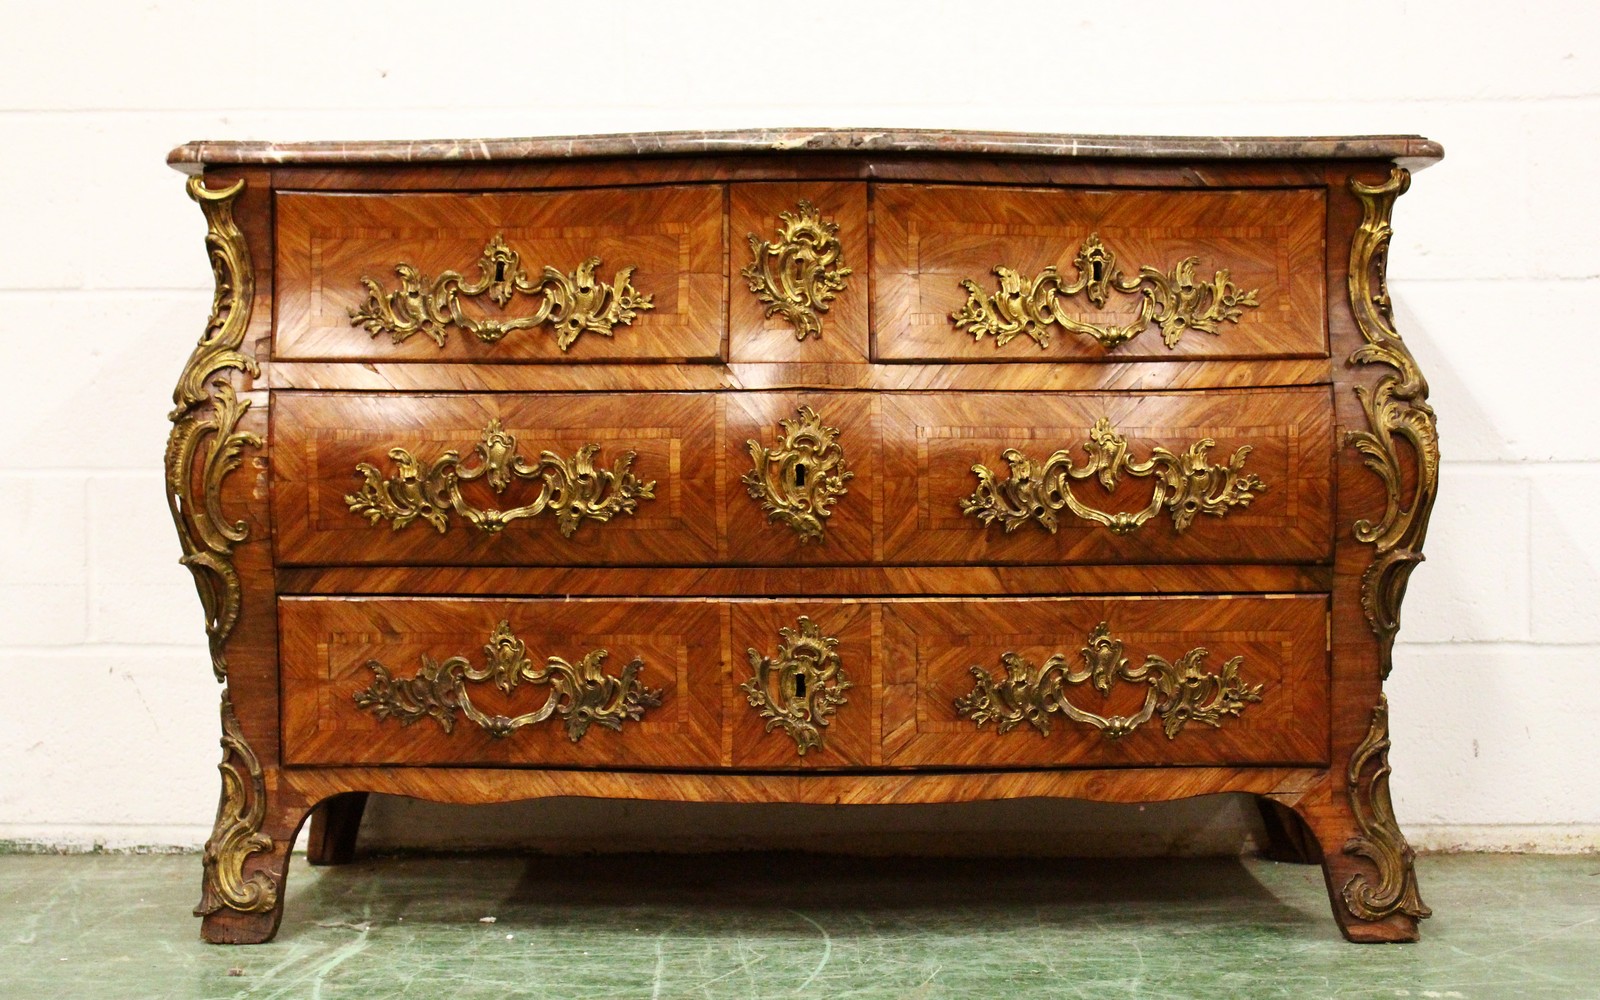 A LOUIS XVTH KINGWOOD BOMBE FRONTED COMMODE by JEAN CHARLES ELLEUME, CIRCA 1755, with grey marble